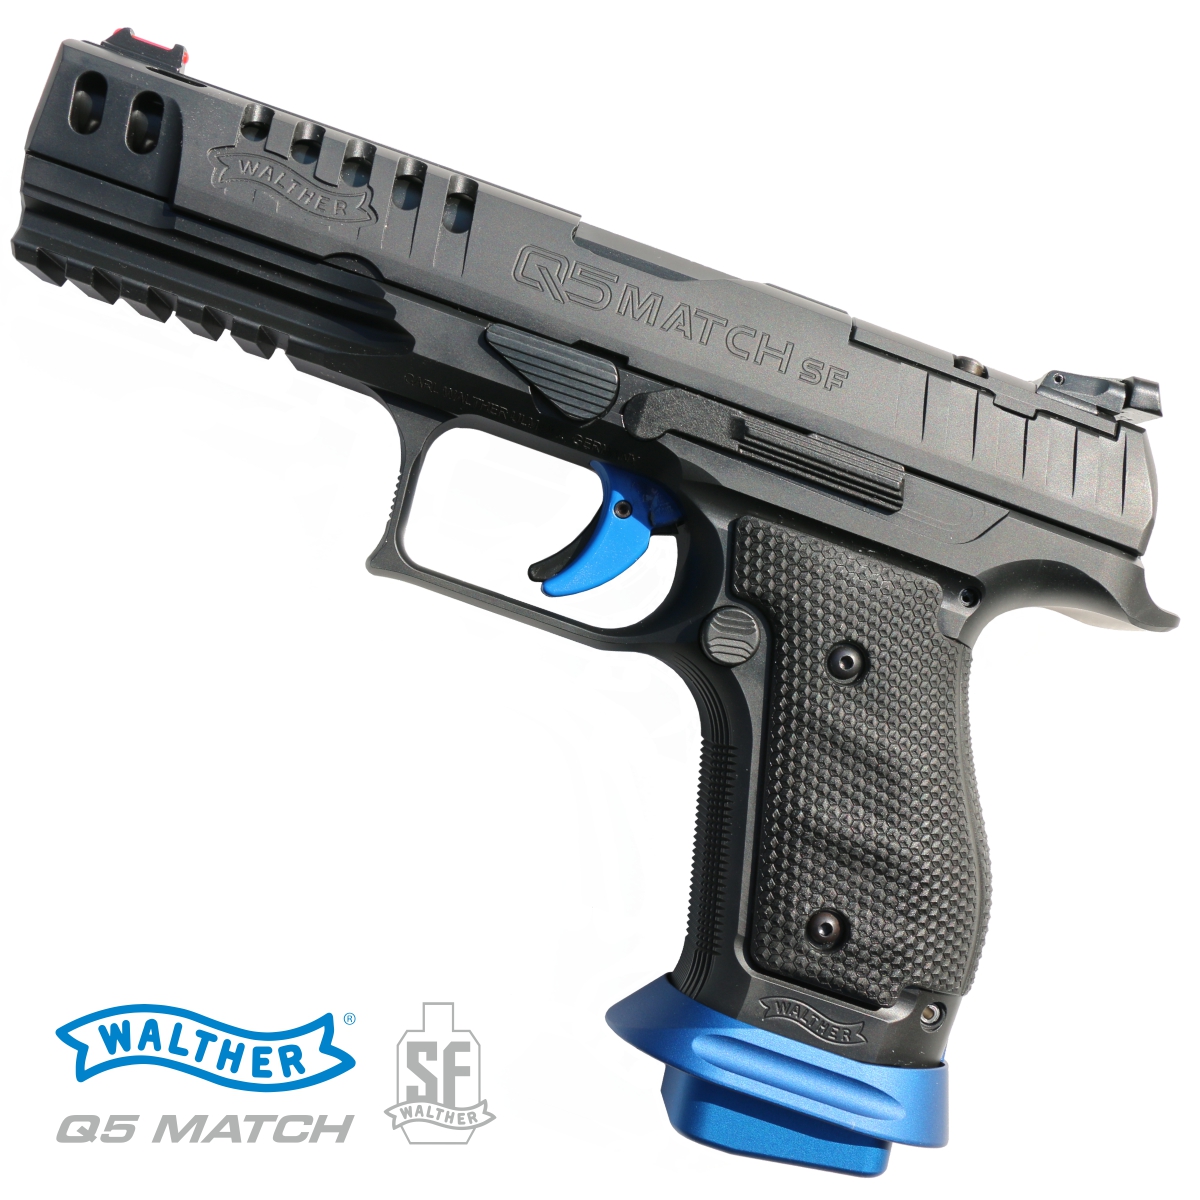 Walther Q5 Match Steel Frame 5